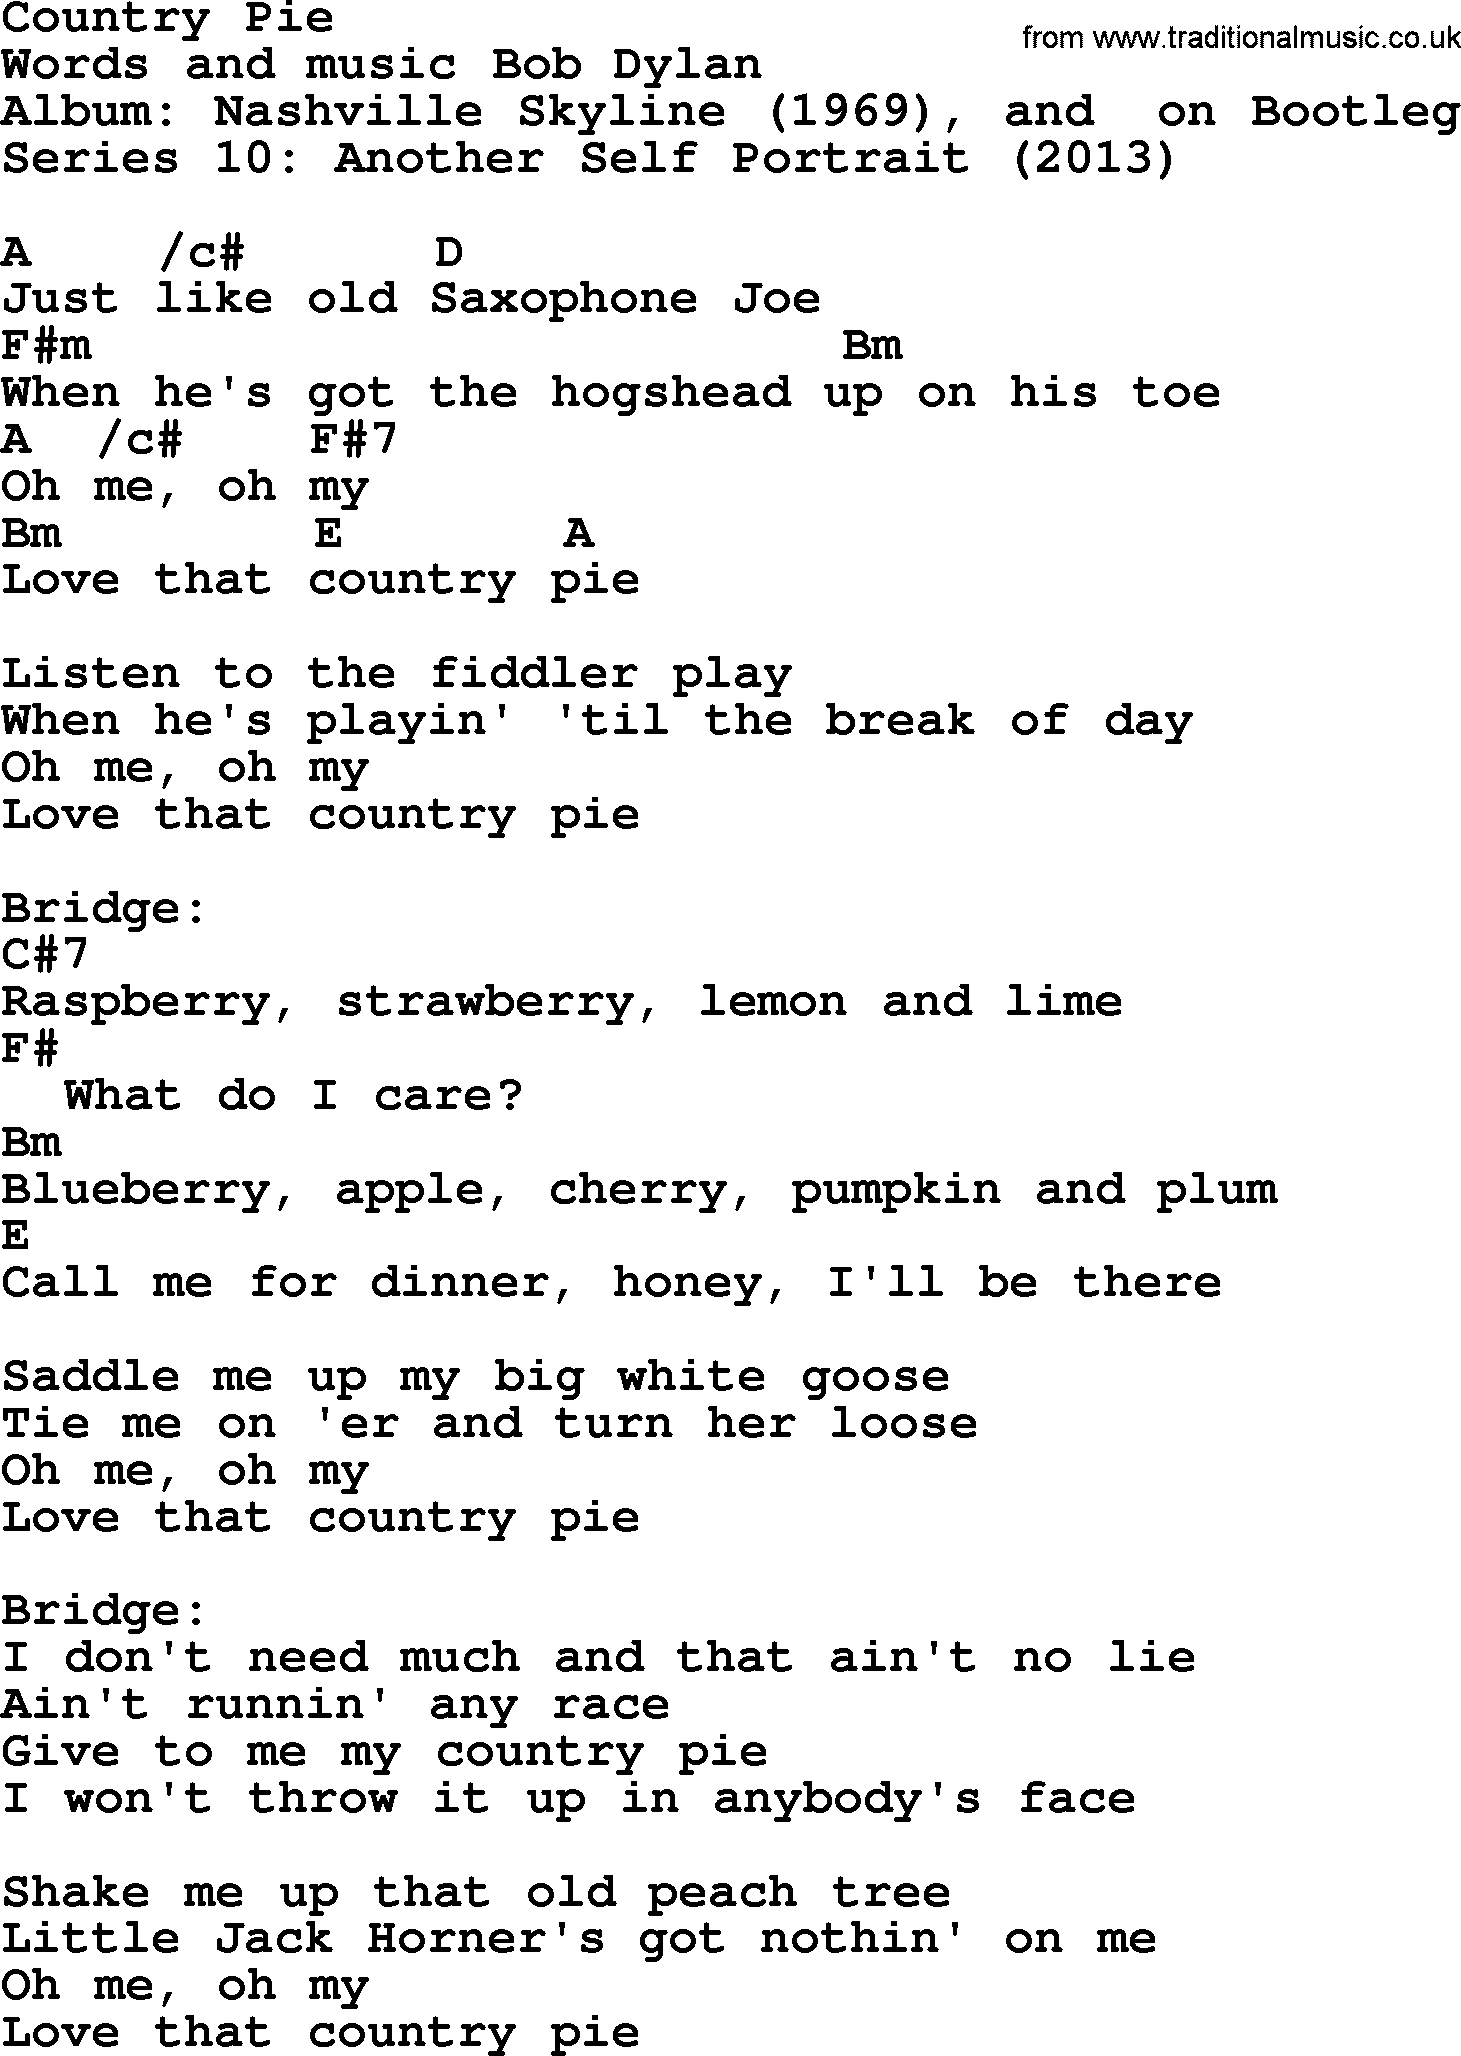 Bob Dylan song, lyrics with chords - Country Pie